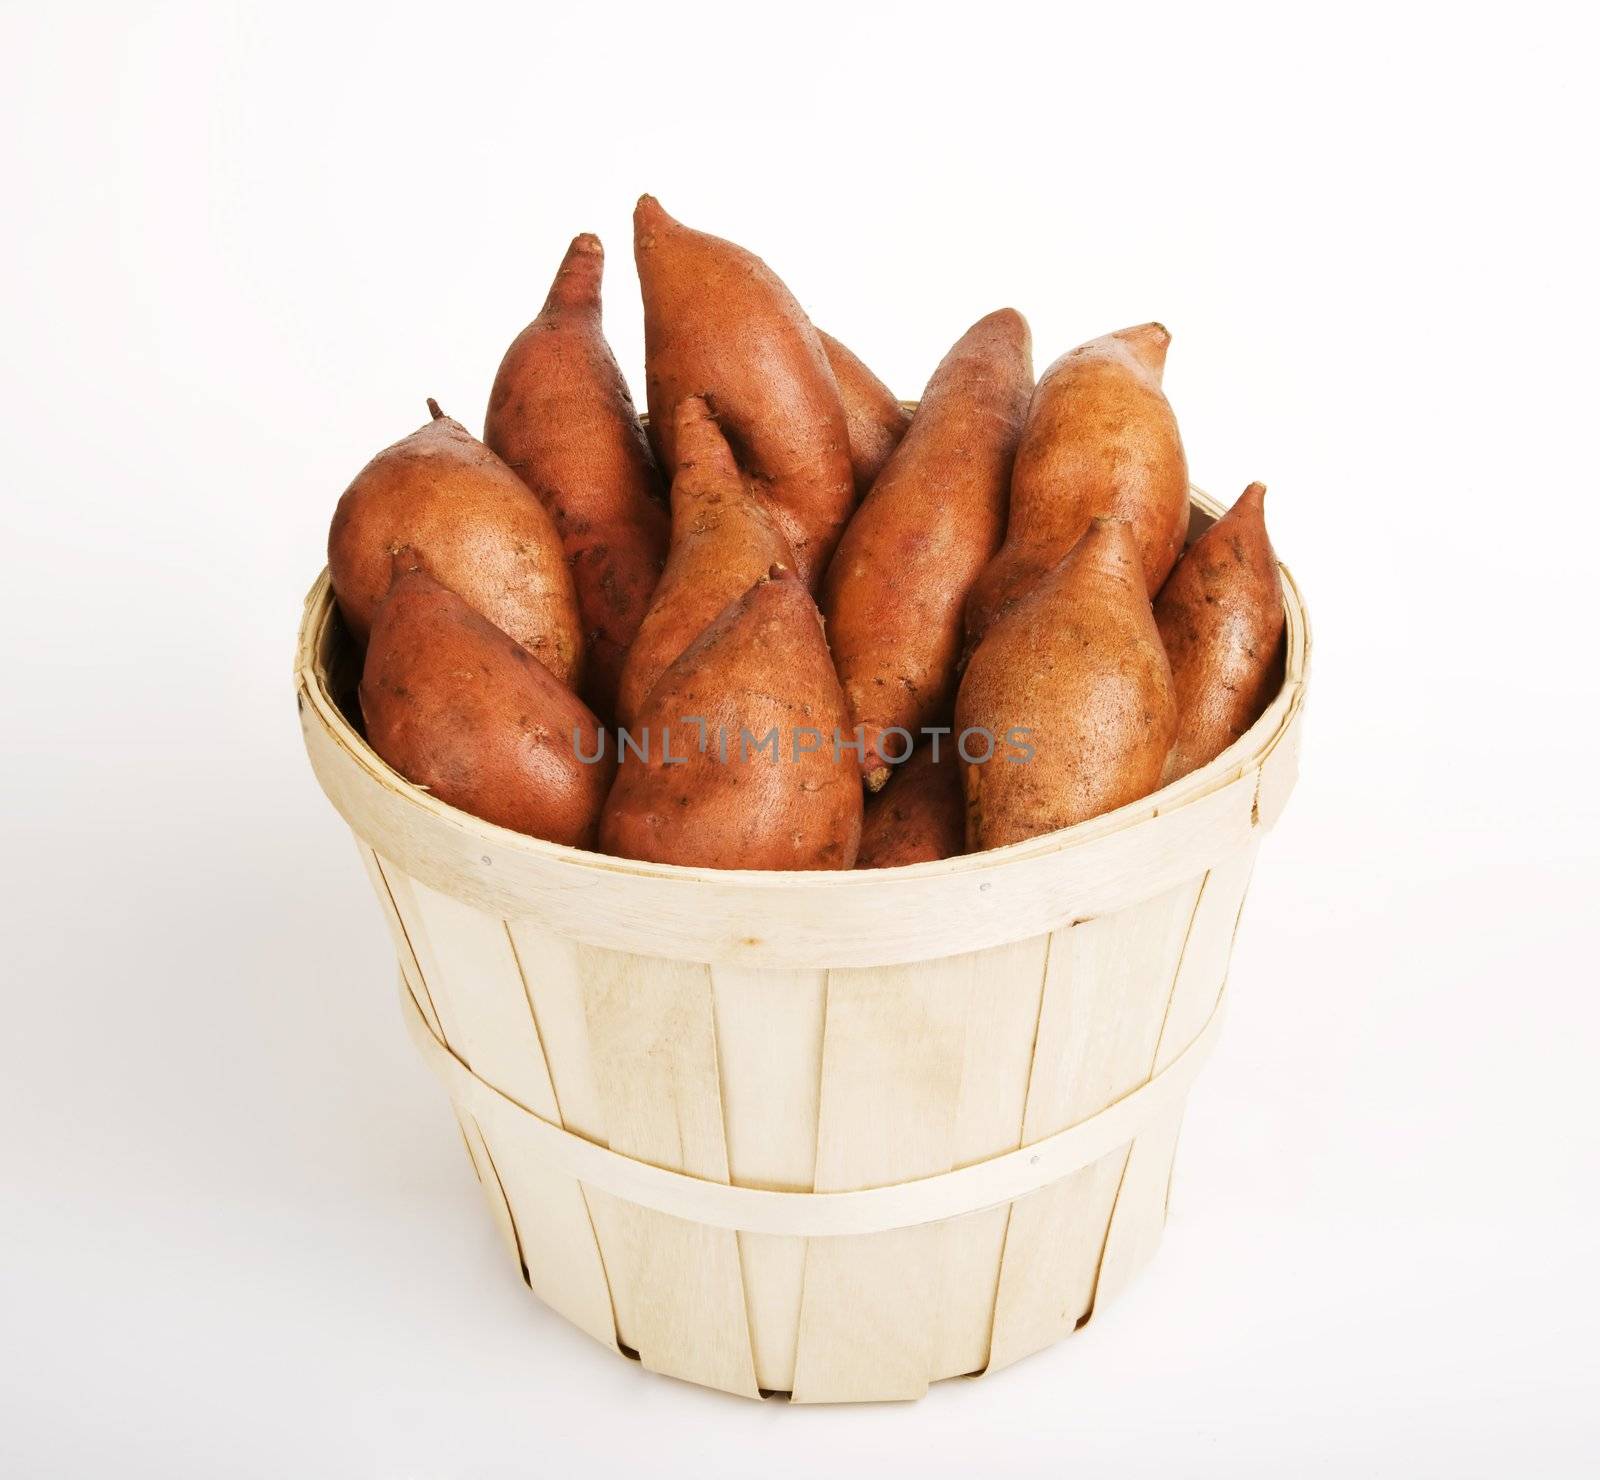 Red Sweet Potatoes gathered in a Woven Basket